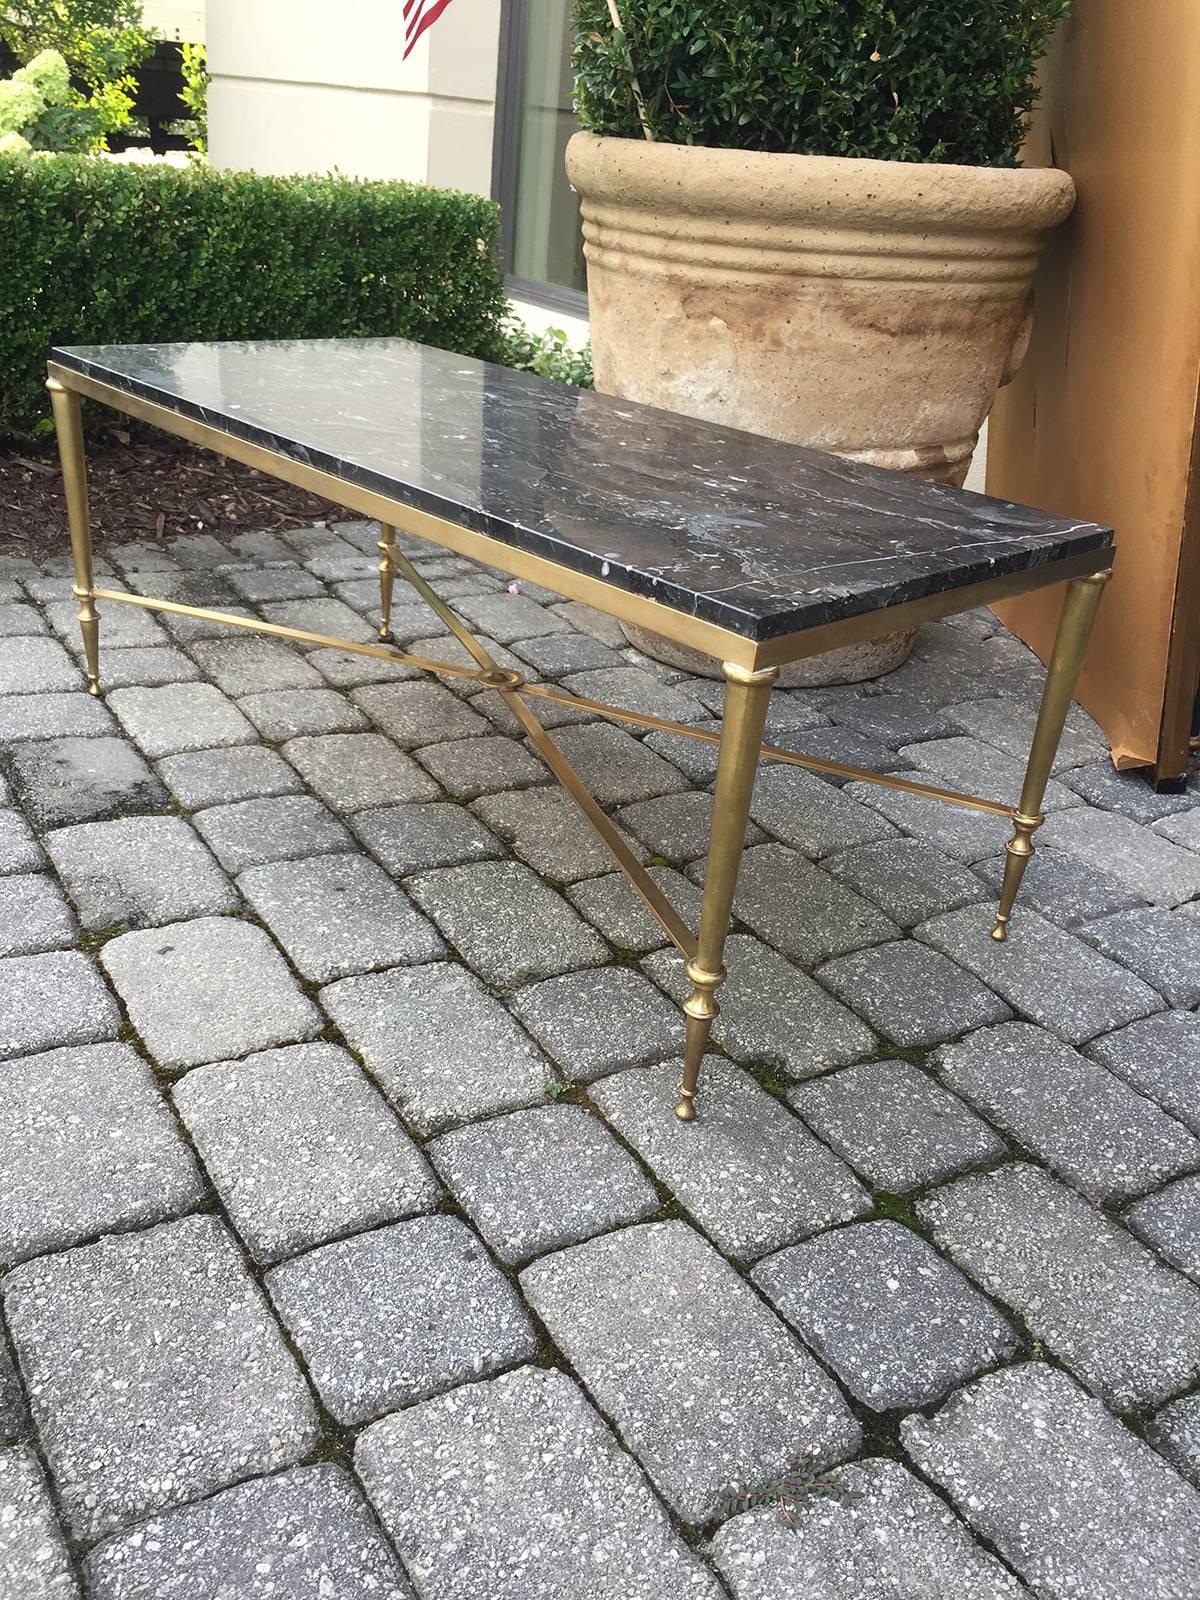 Neoclassical brass with marble top coffee table, beautiful detail, circa 1970s
Overall dimensions 39.75 